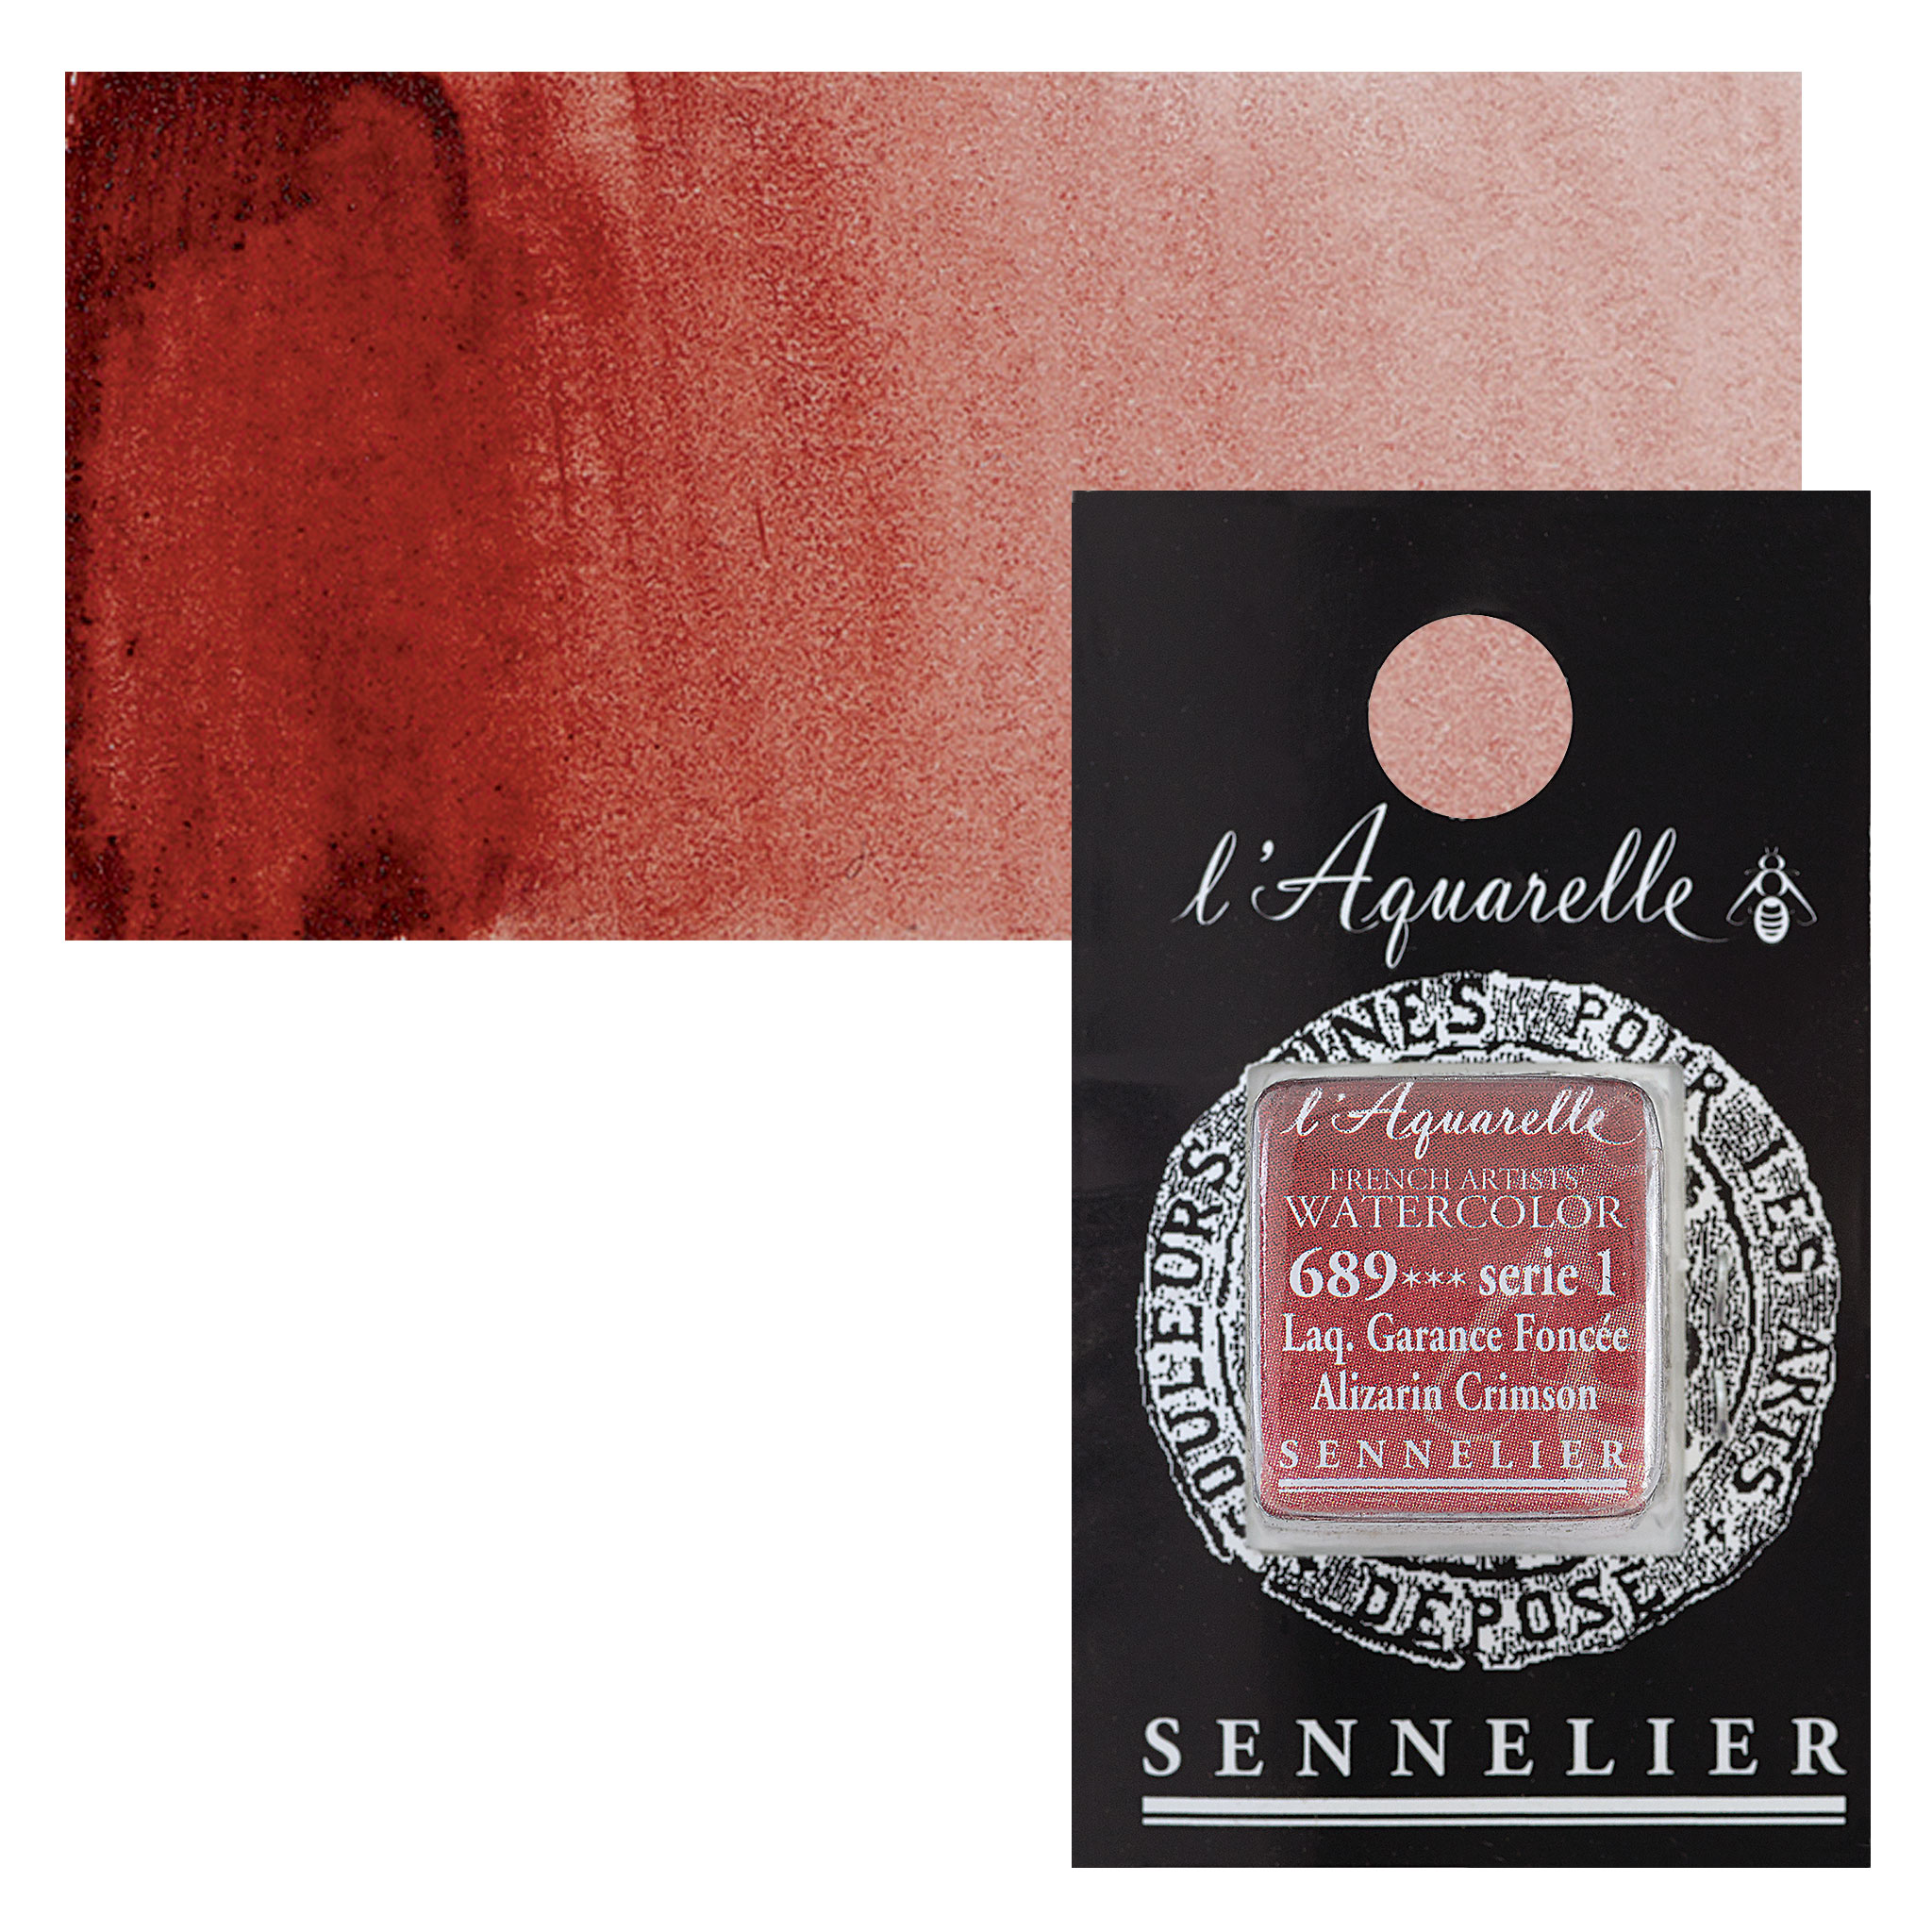 Sennelier French Artist Watercolor Set Featured in an Elegant Black